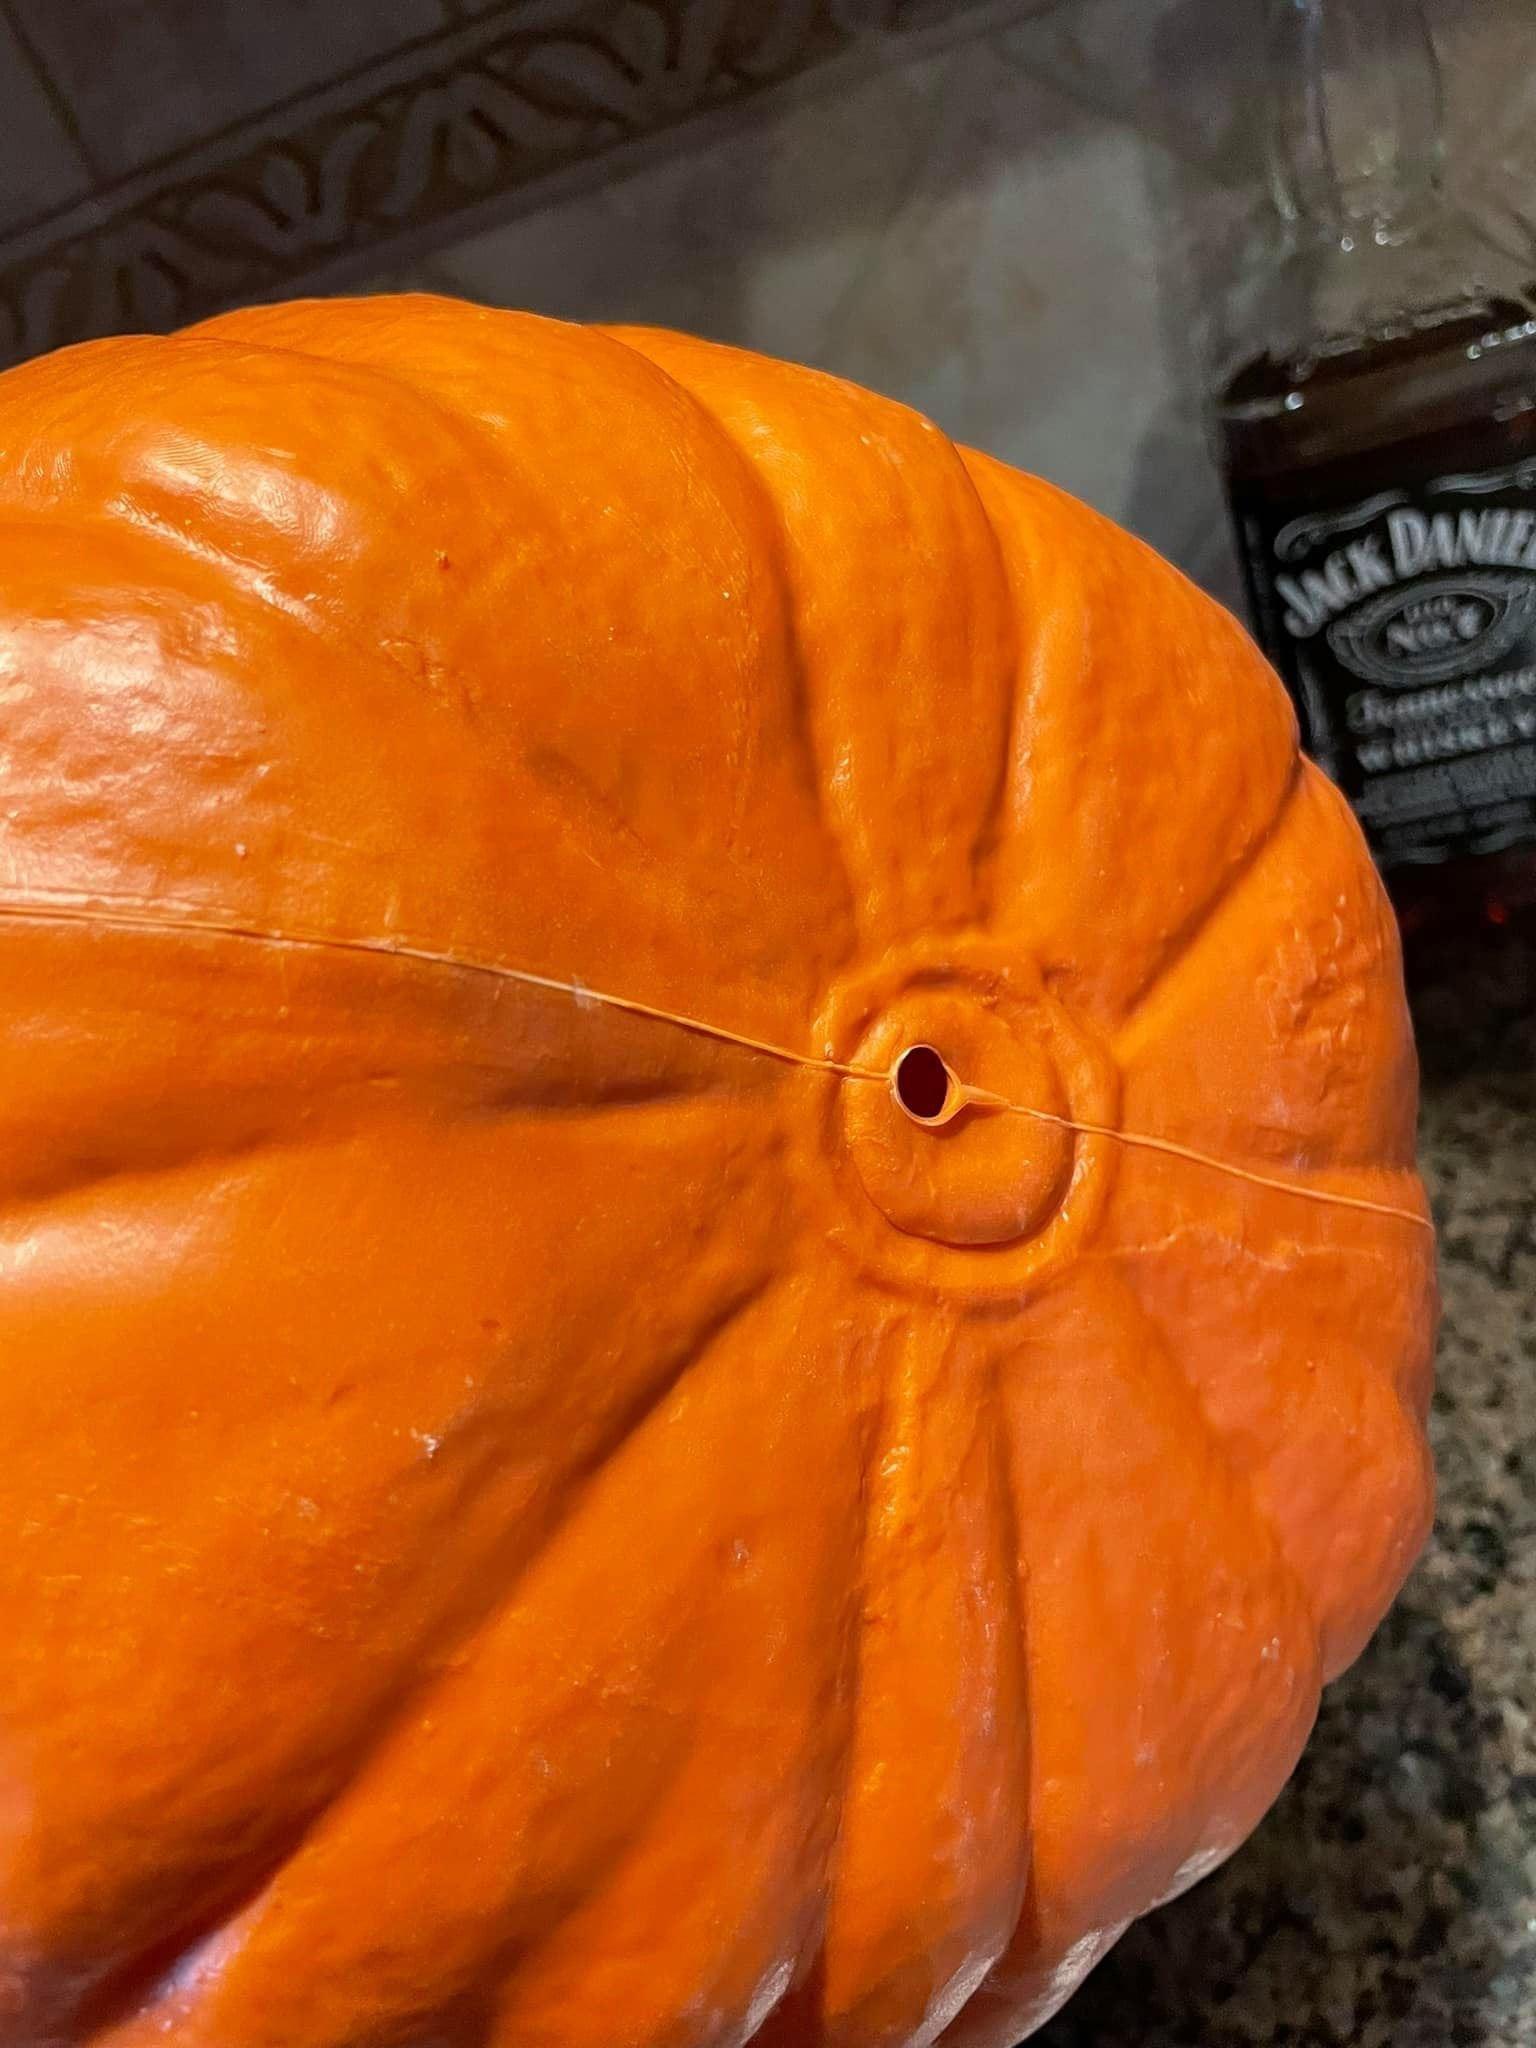 Jack Daniel’s Promotional Pumpkin - The Whiskey Cave